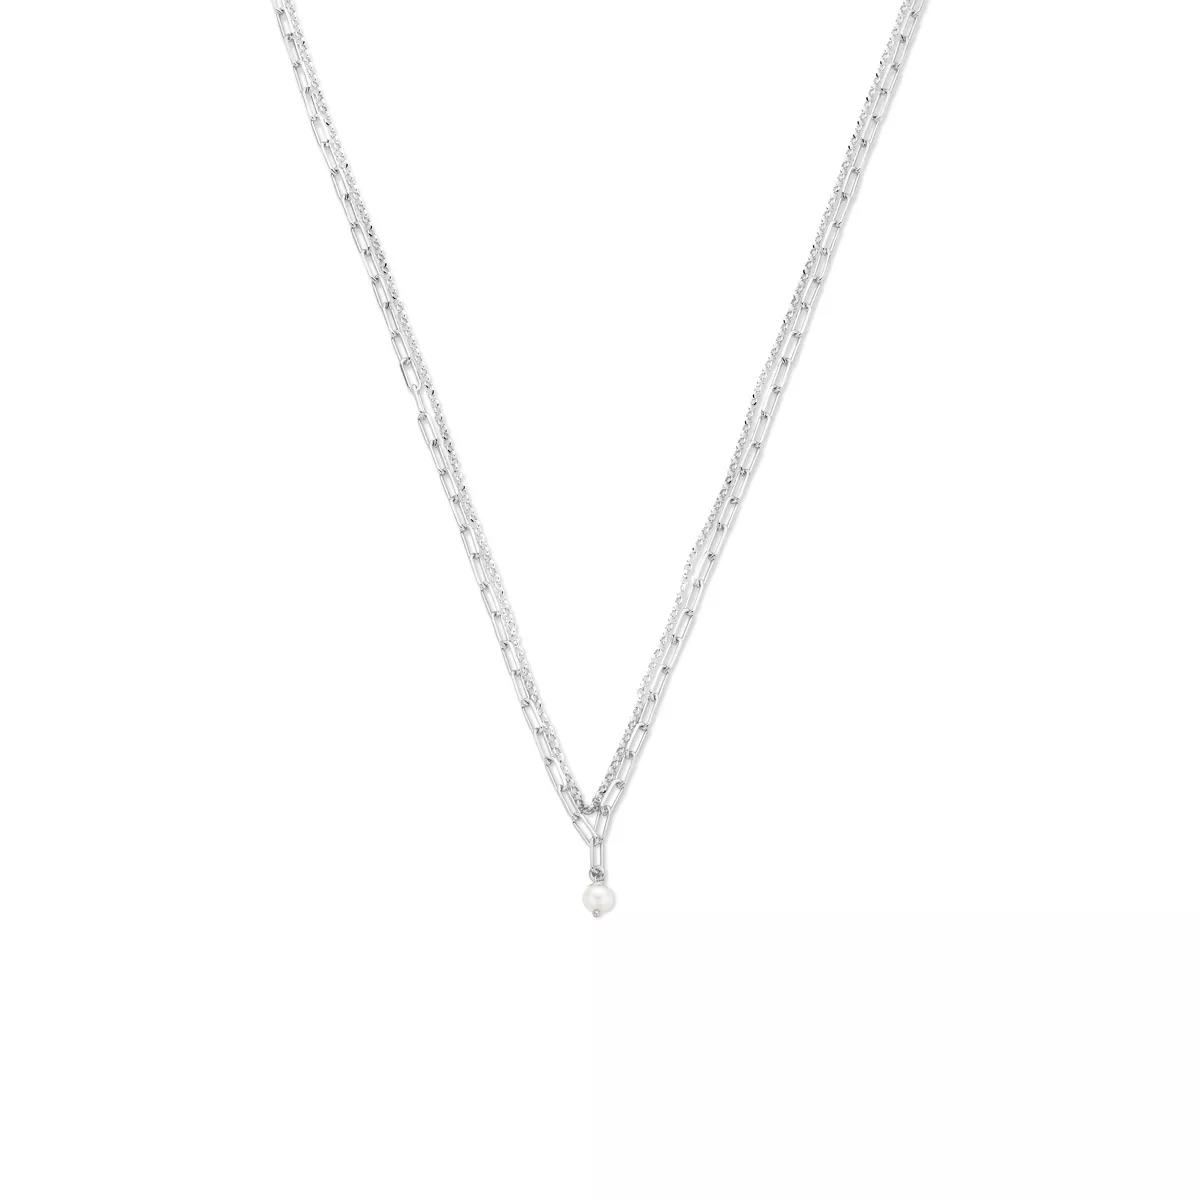 Multi-ketting zilver-zoetwaterparel wit 2,8 mm 41 + 4 cm